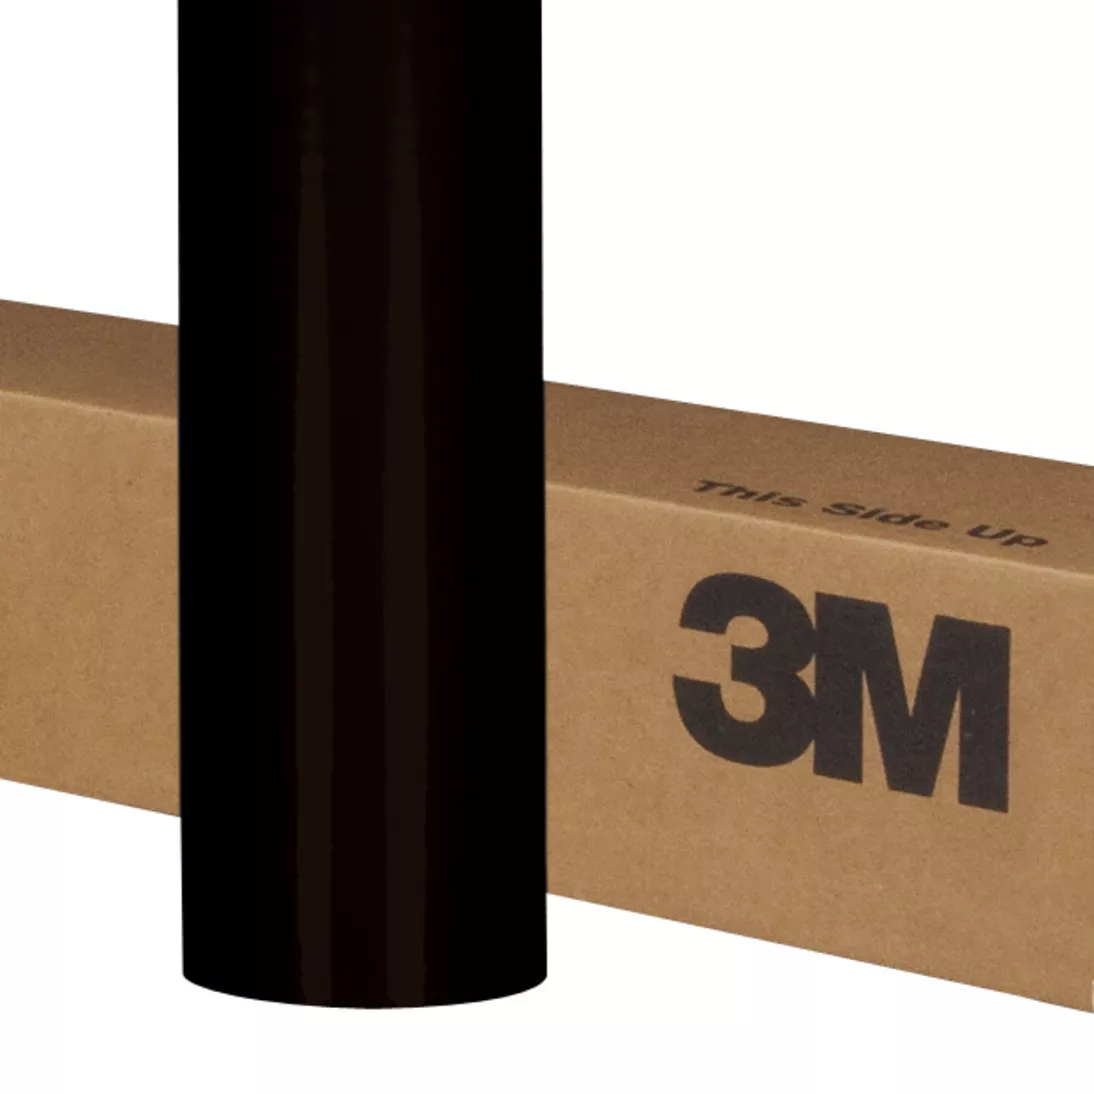 3M™ Scotchcal™ ElectroCut™ Graphic Film 7125-19, Deep Mahogany Brown, 24
in x 50 yd